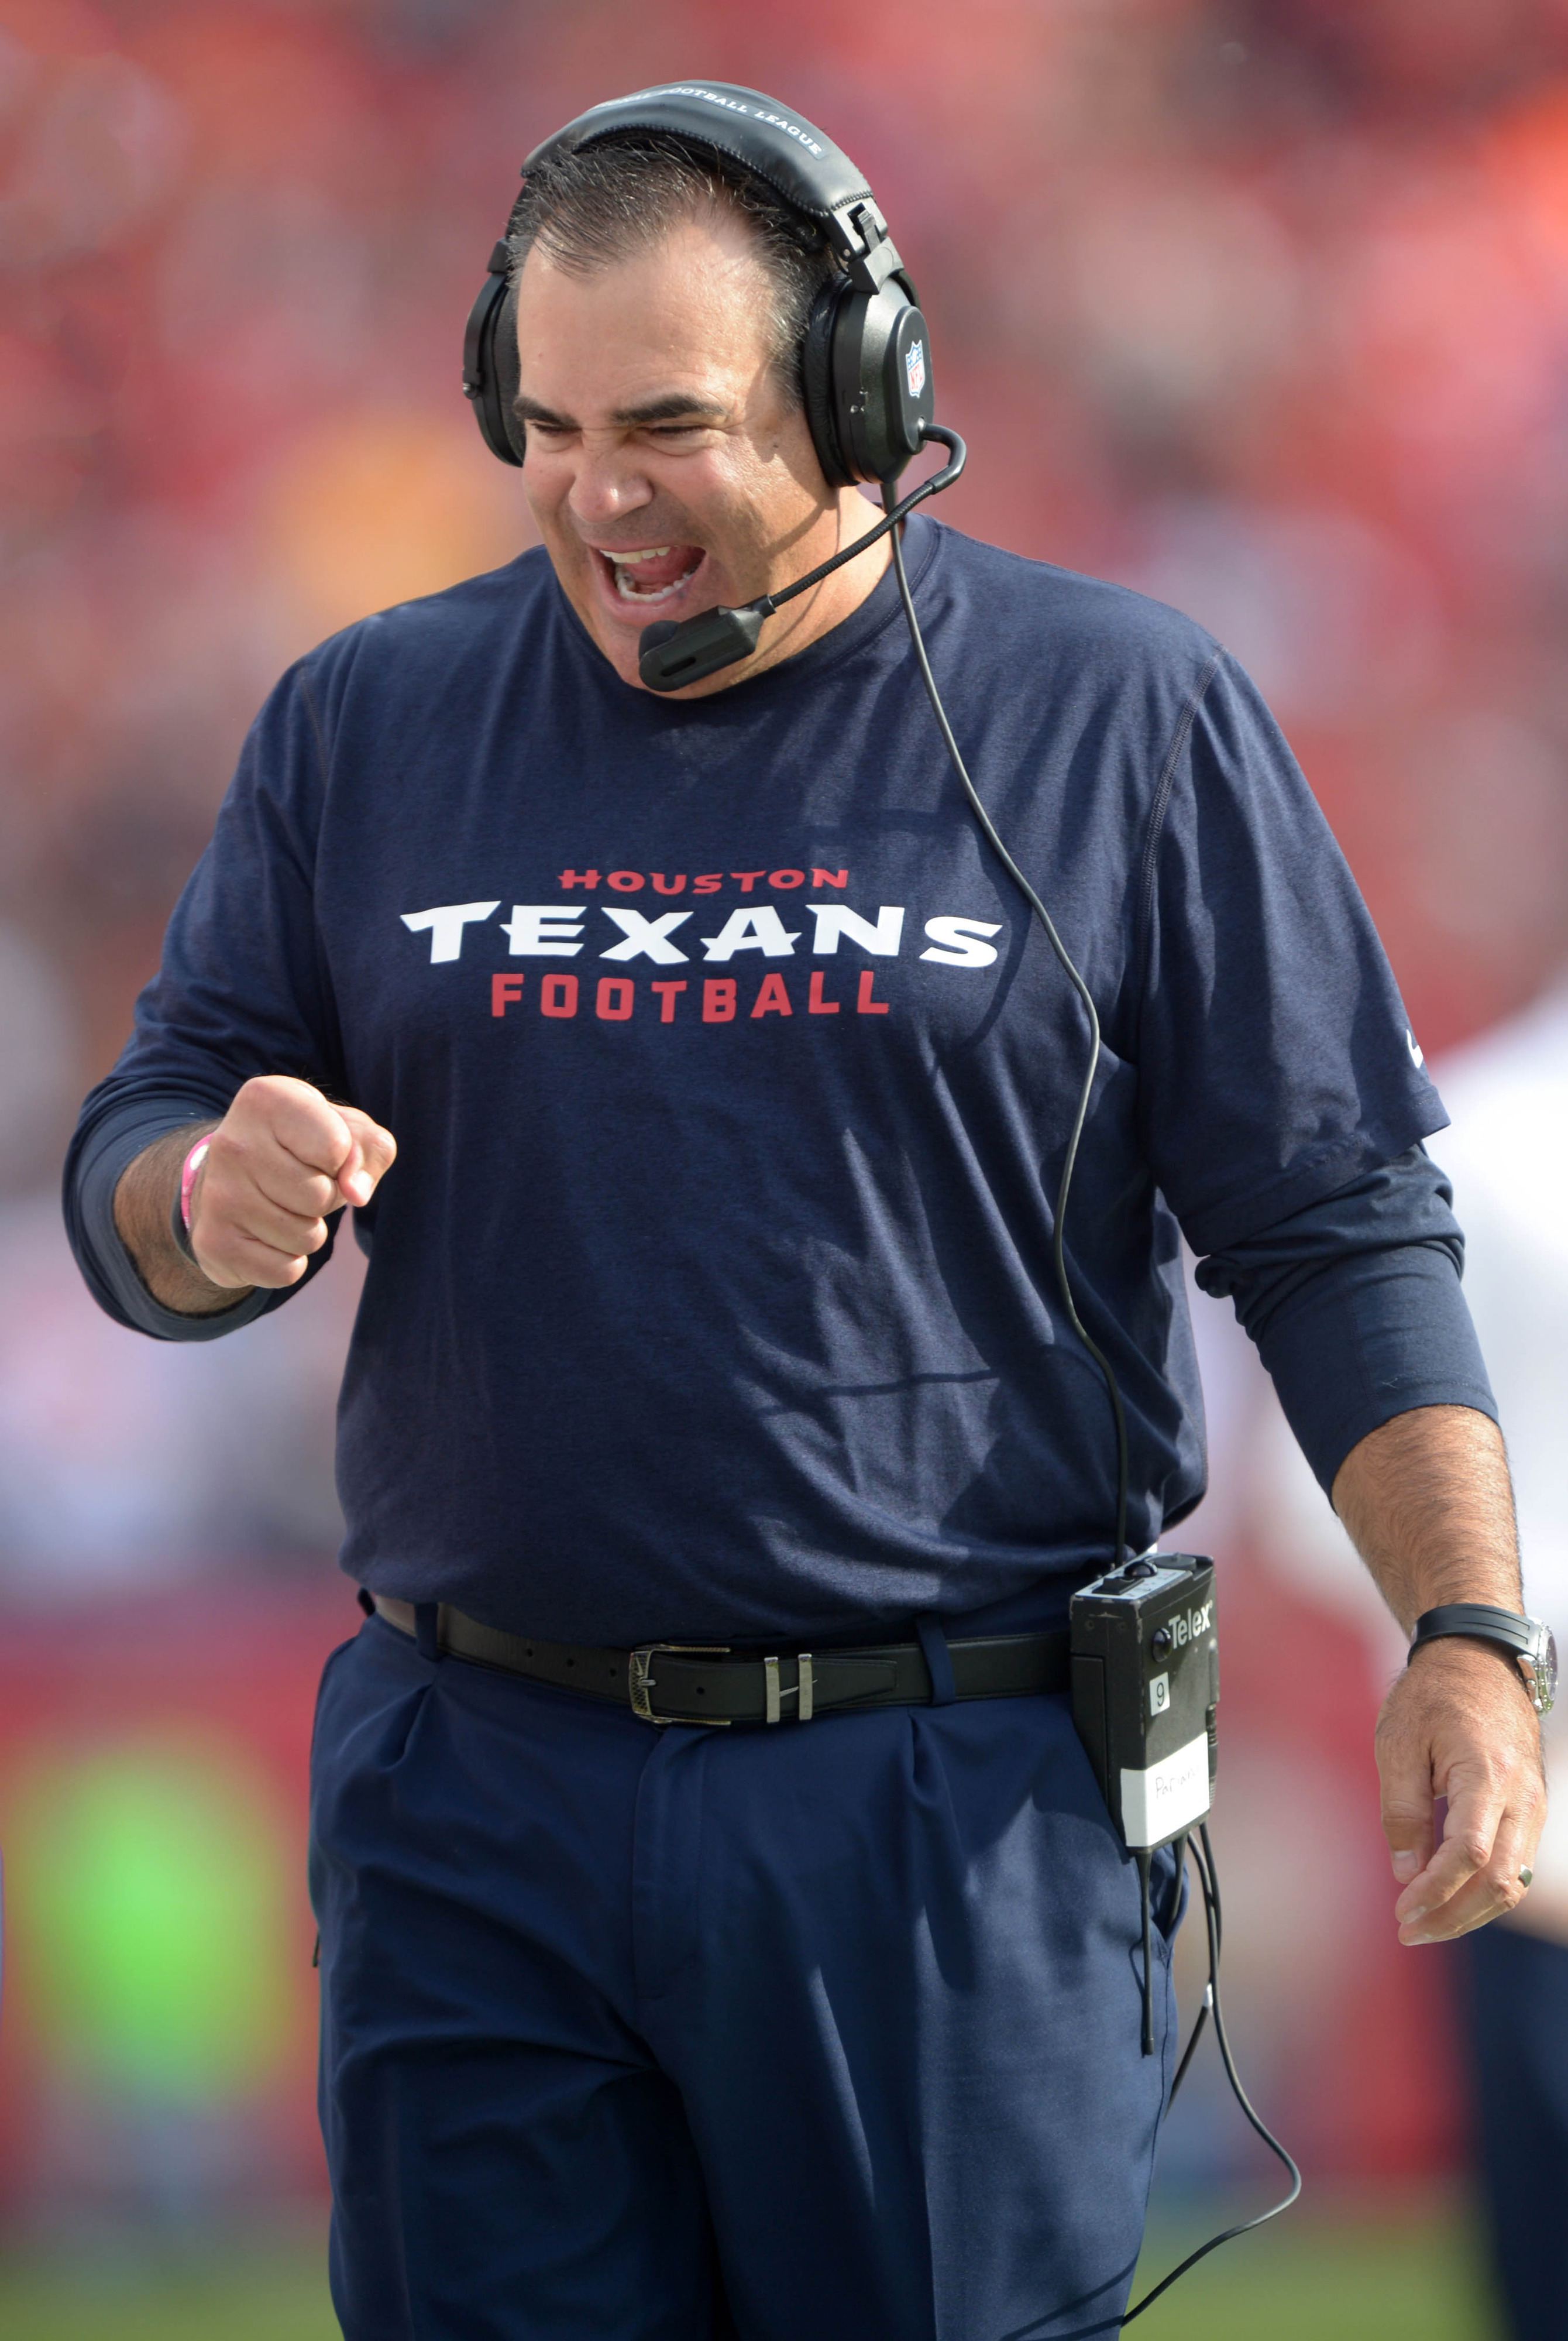 This is the Texans' TE coach.  He's excited about his ensemble.